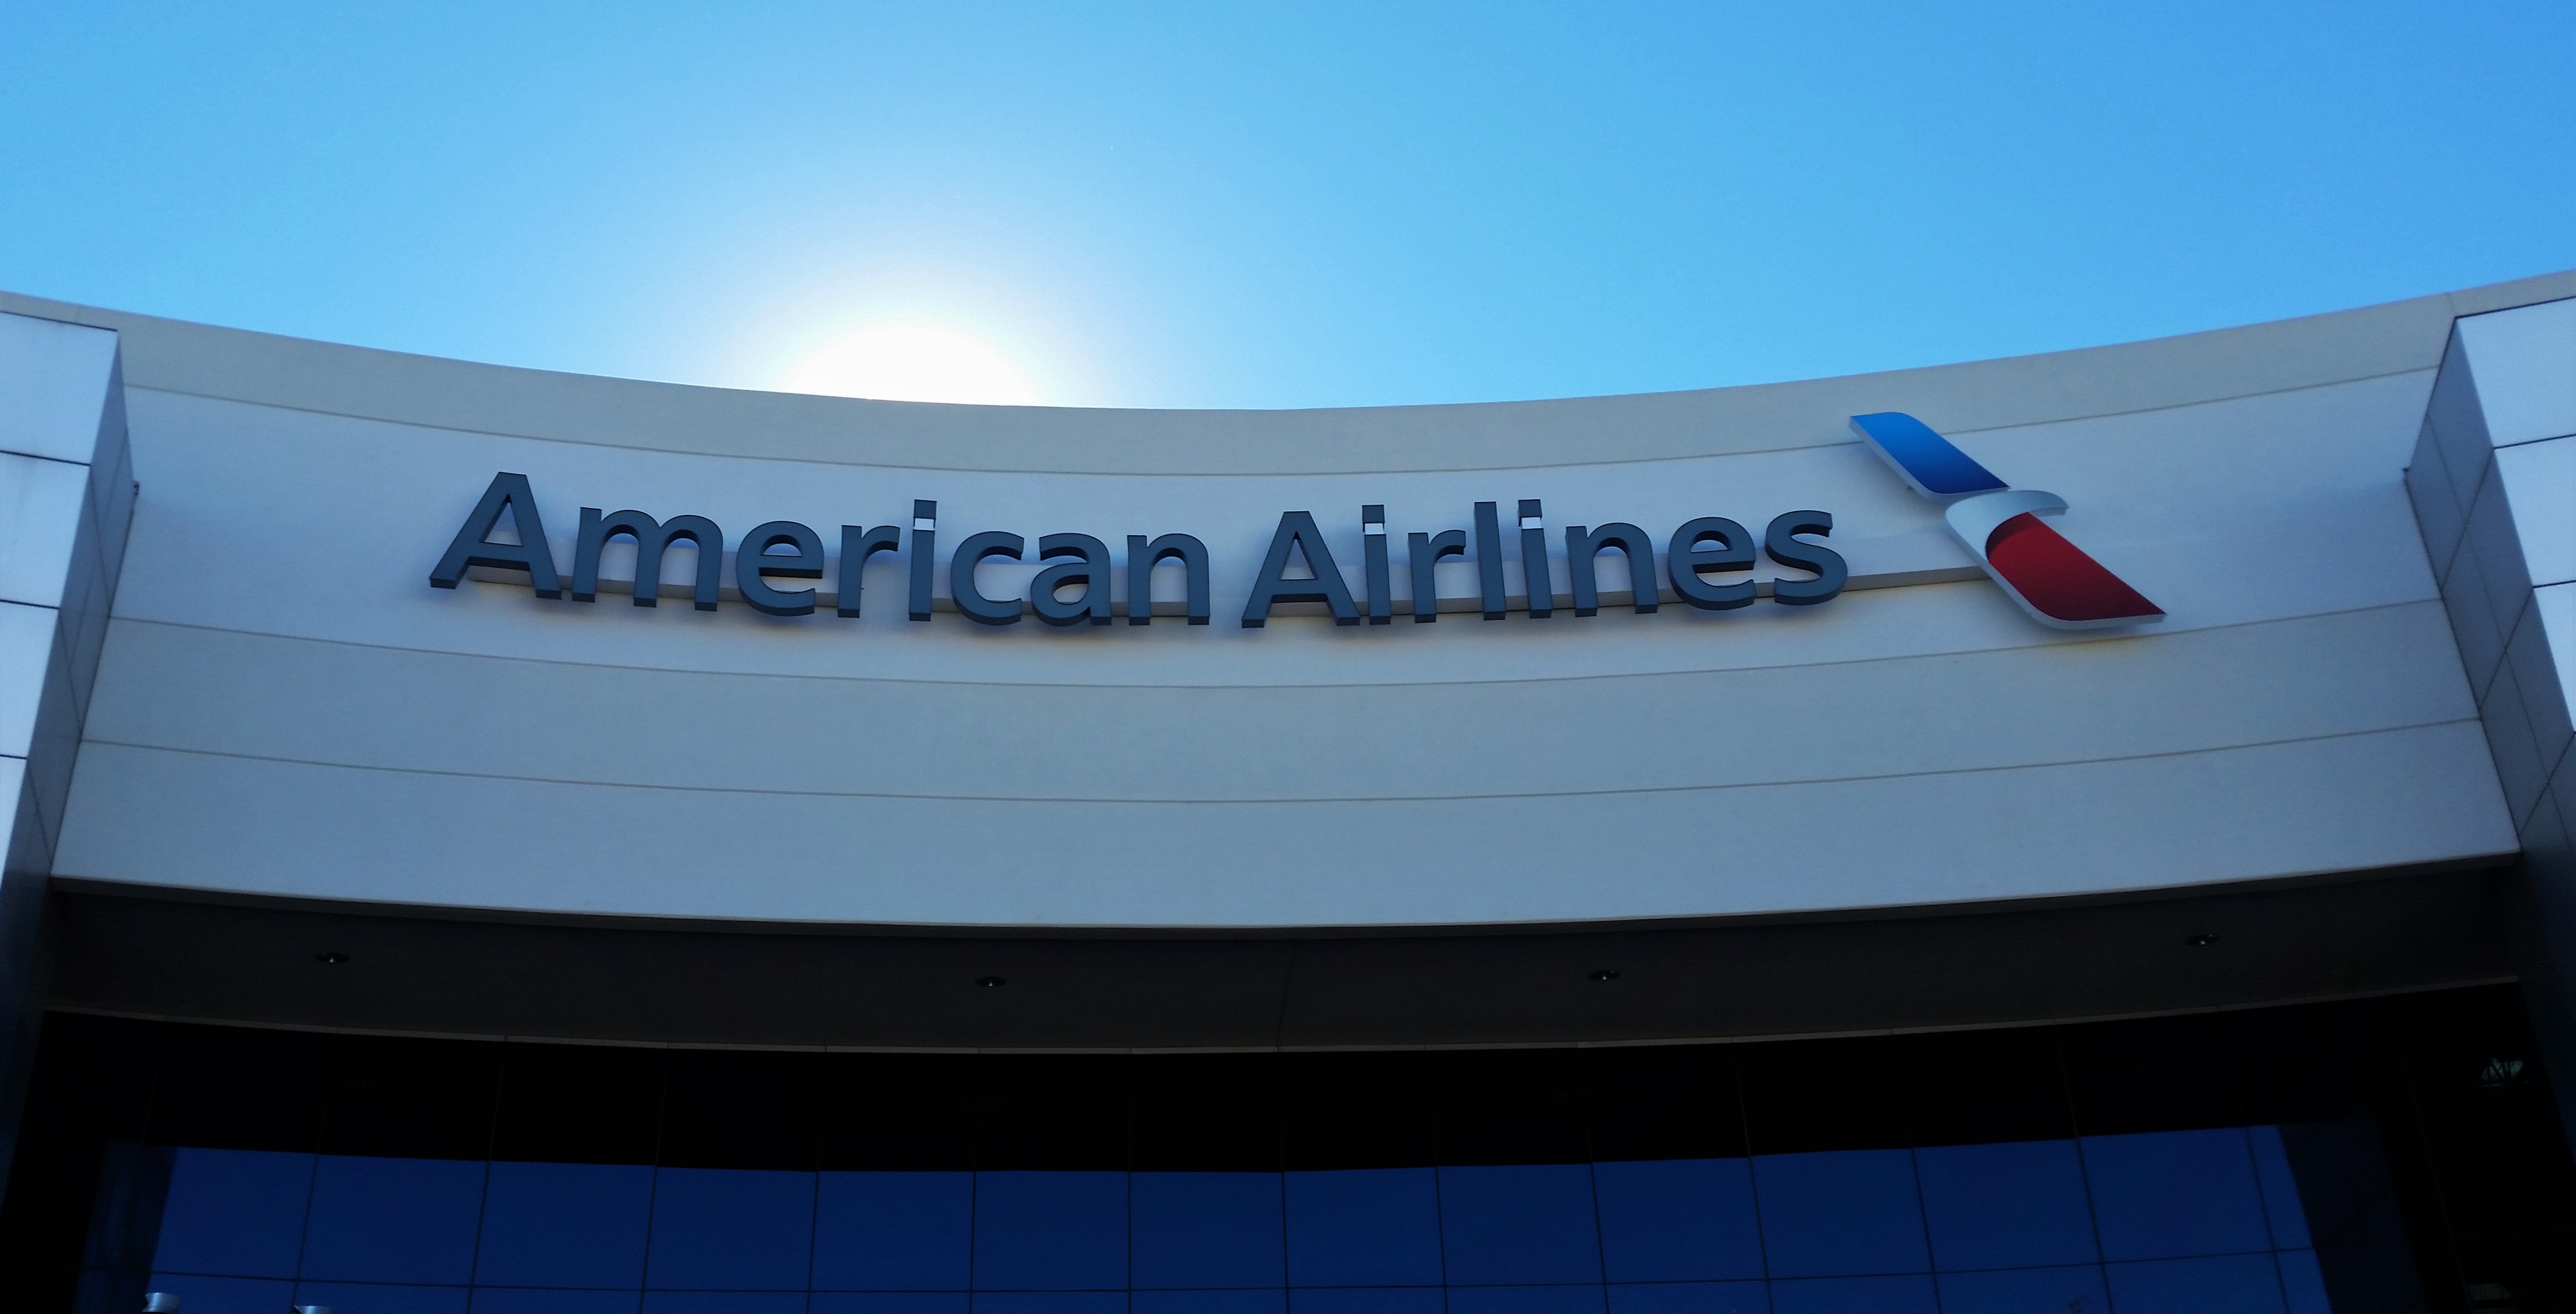 American Airlines Signage | Colite